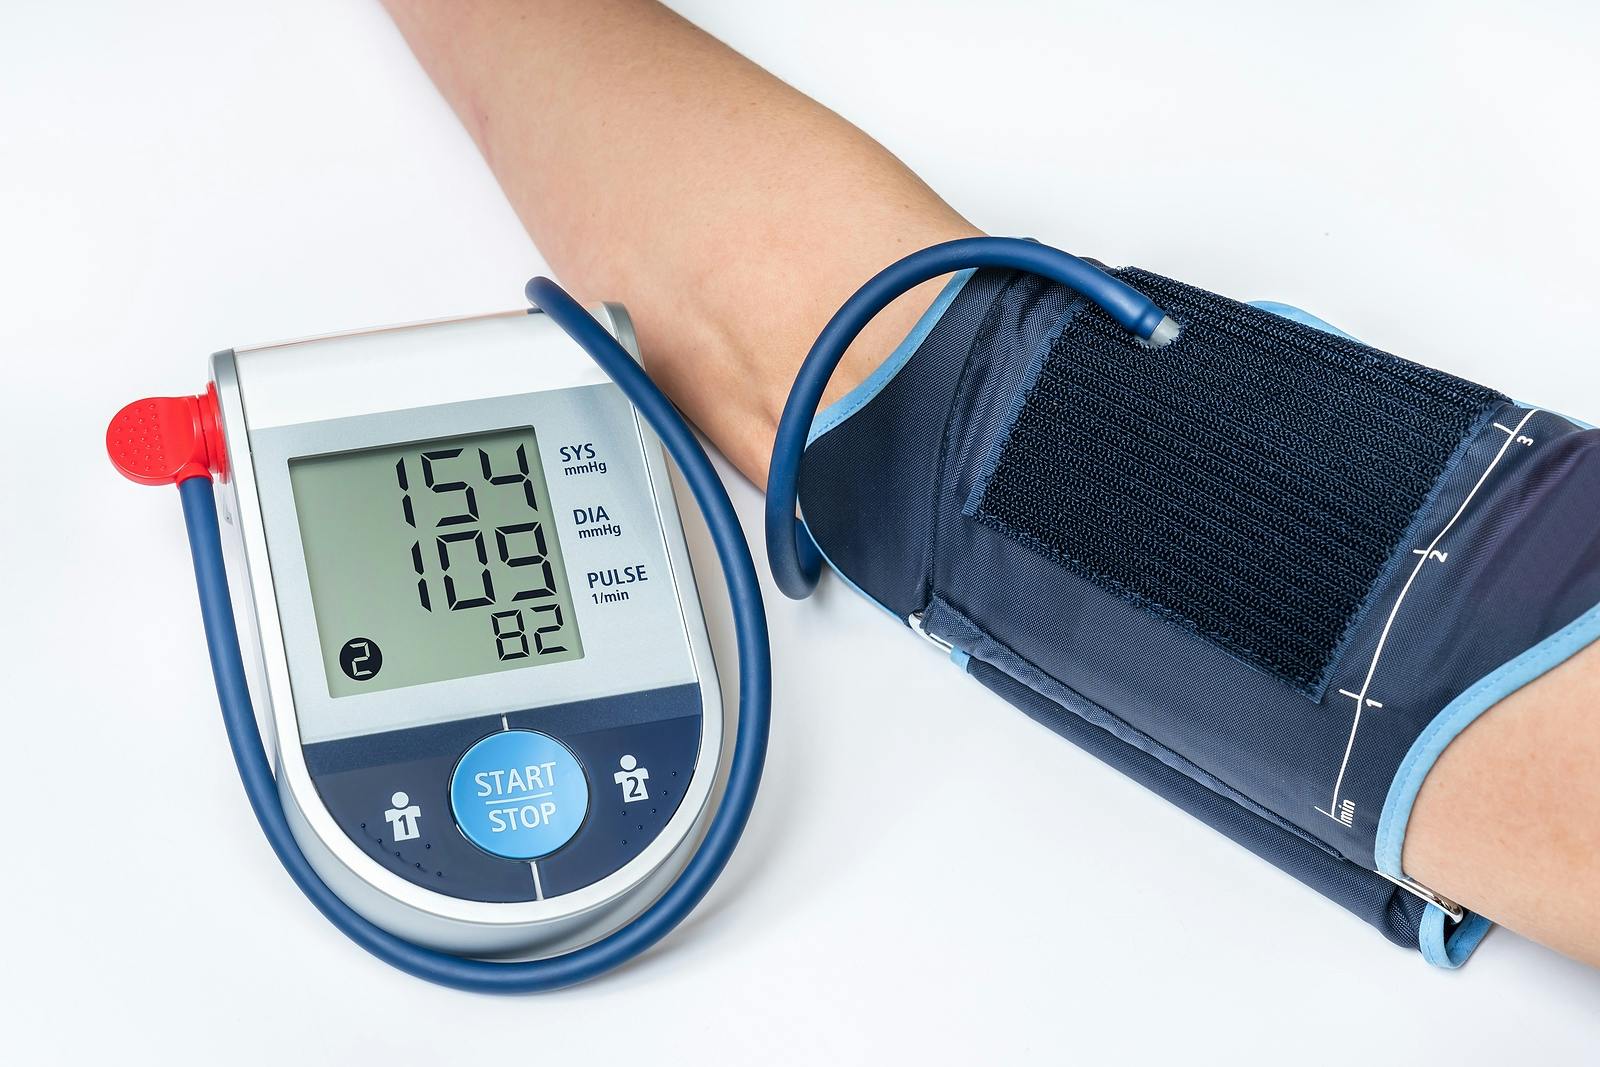 person with high blood pressure of 154/109 practices home monitoring